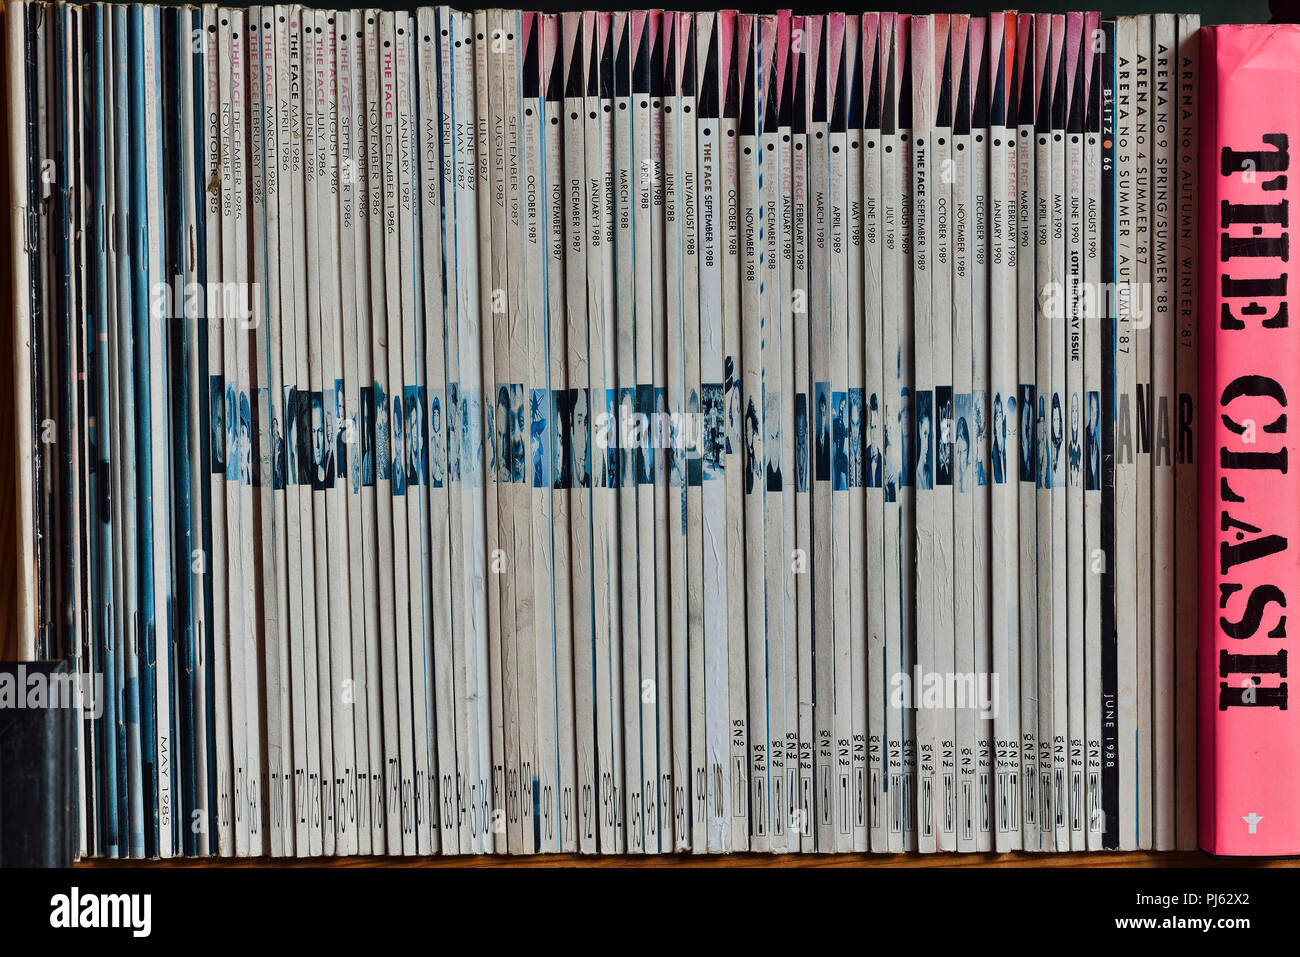 A collection of The Face and Arena magazines. Stock Photo